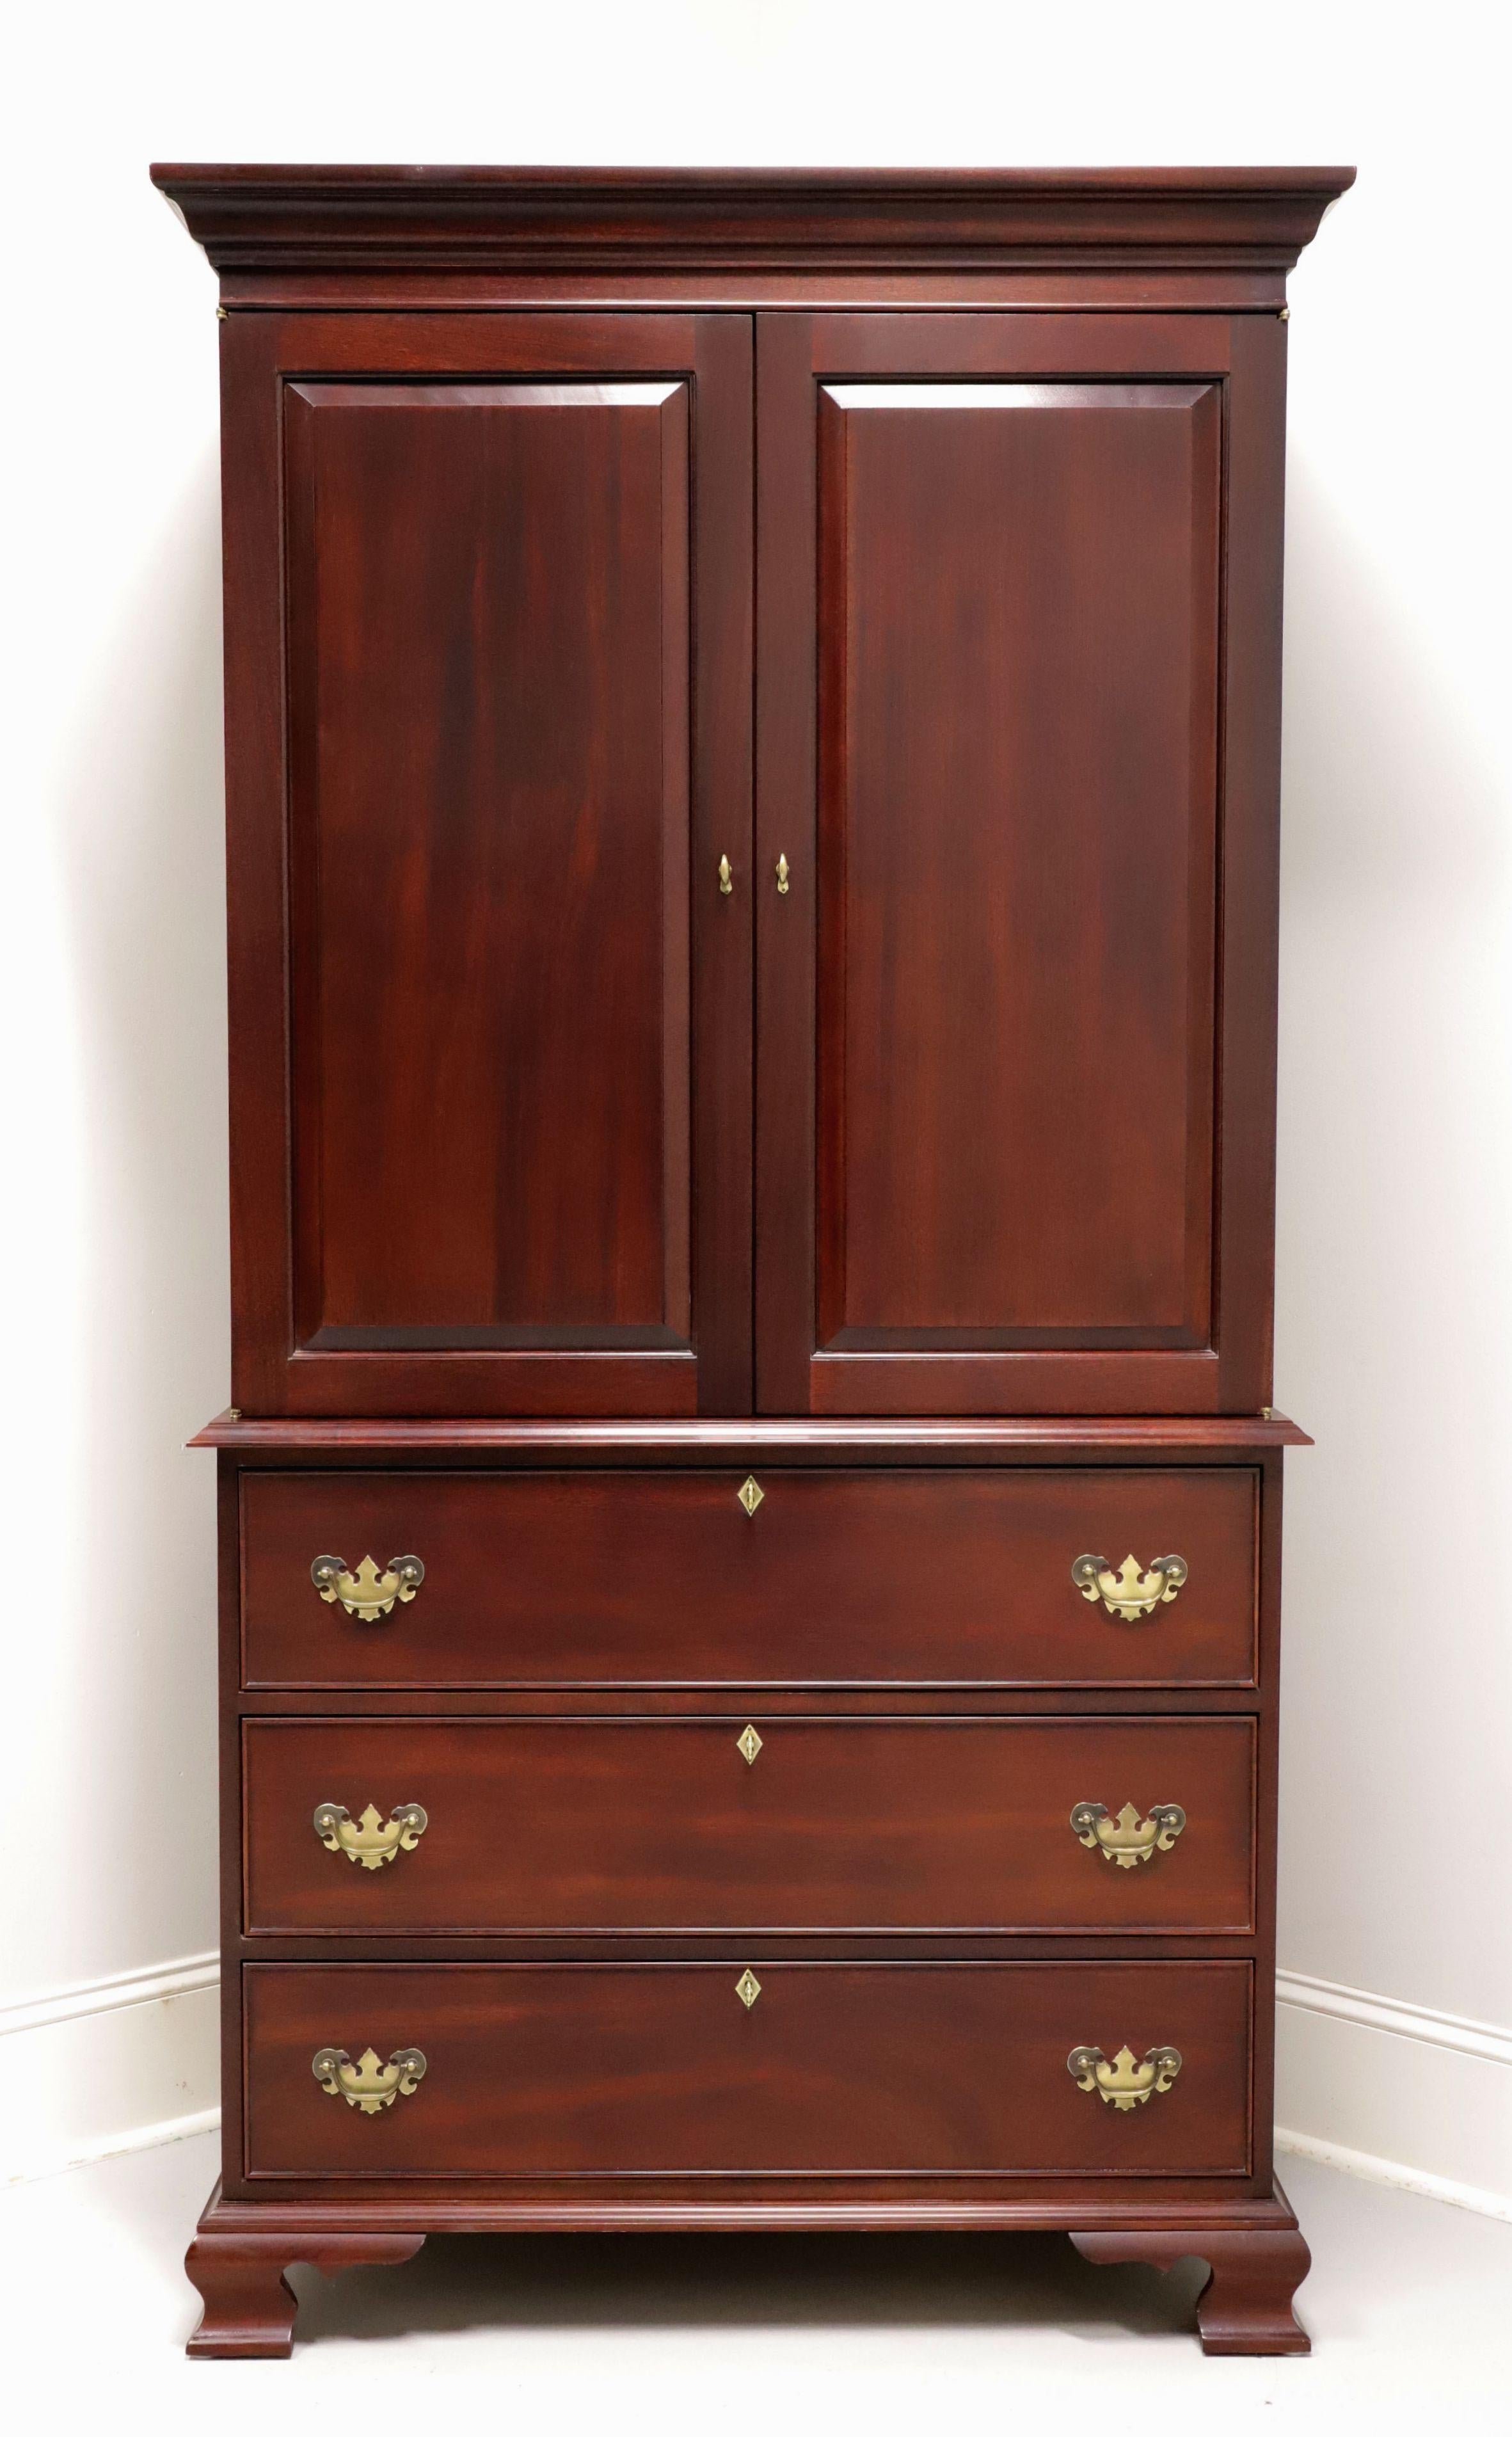 A Chippendale style armoire / linen press by high-quality furniture maker Craftique. Custom-crafted of solid mahogany with brass hardware, crown moulding to top, ogee edges, and ogee bracket feet. Upper area features two solid fold flat doors